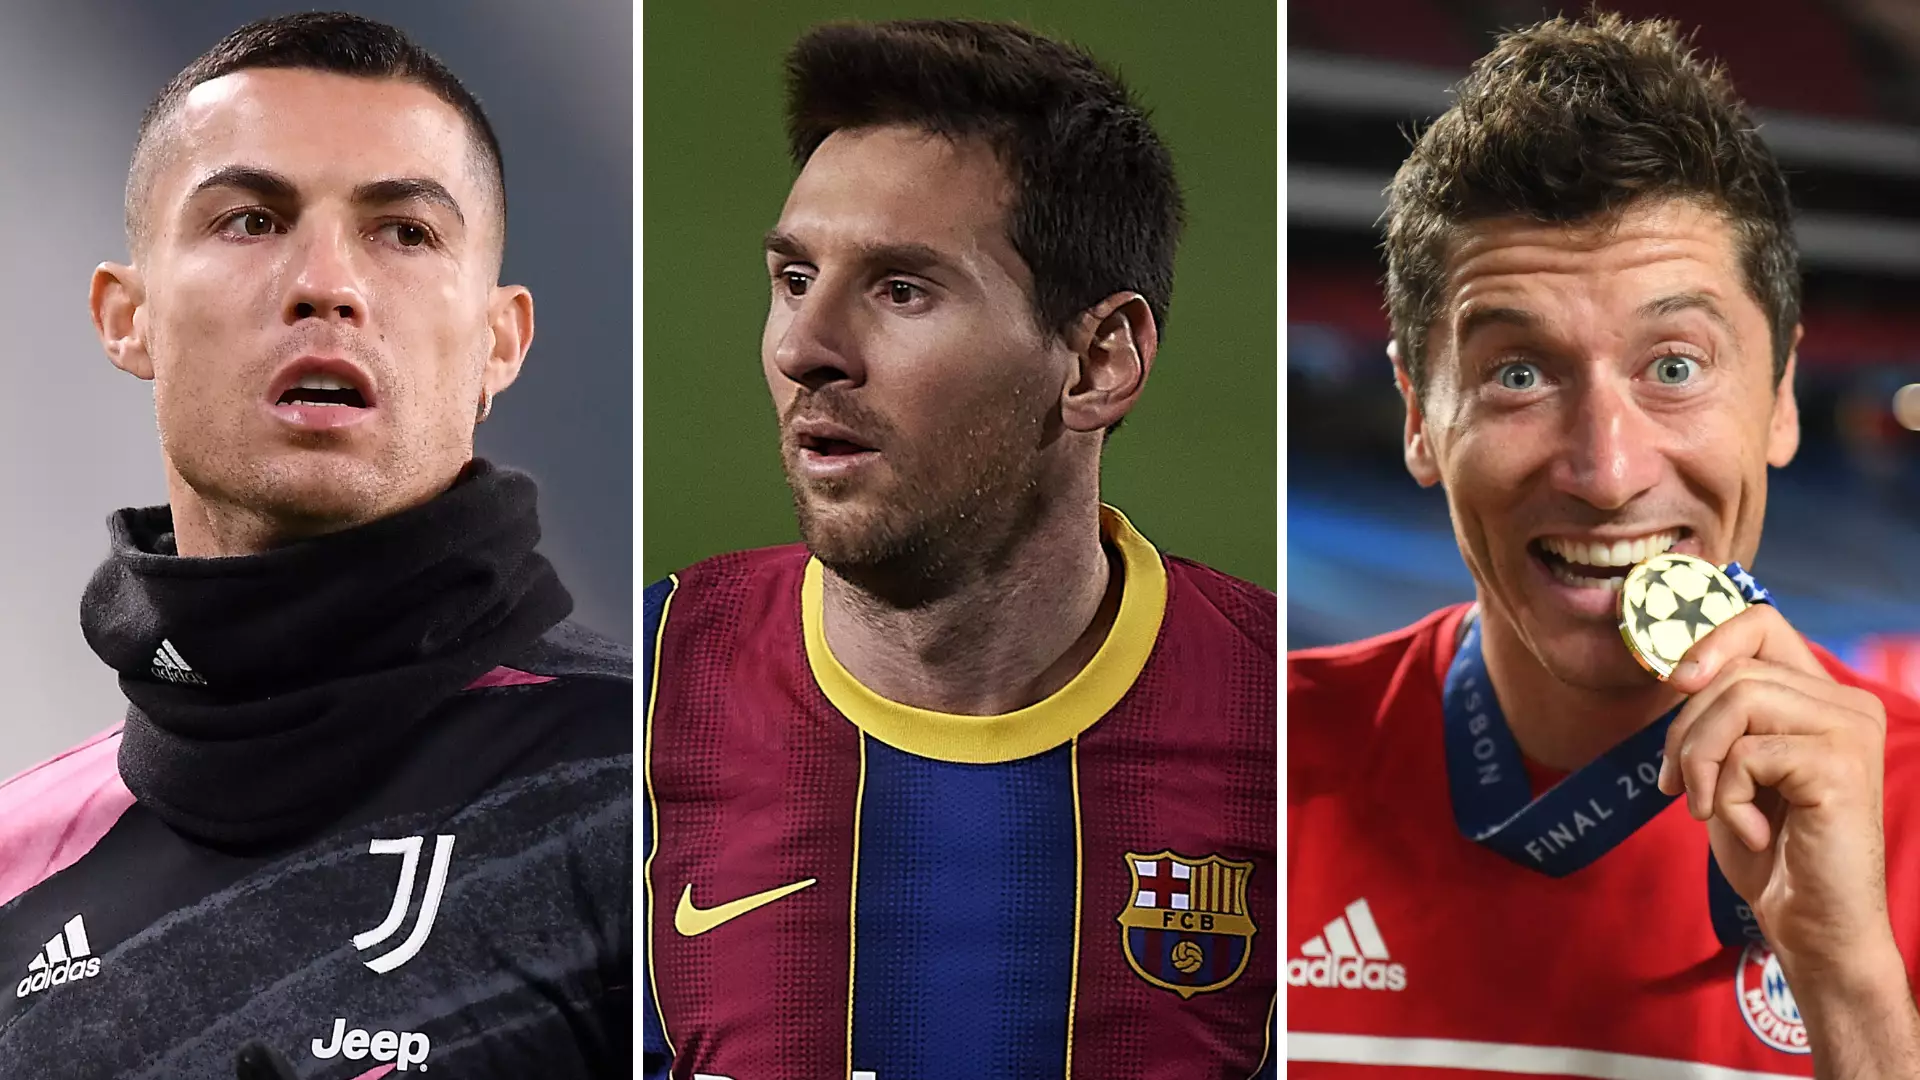 Lionel Messi Ranked Only 10th In The 100 Best Players Of 2020 By Madrid Media